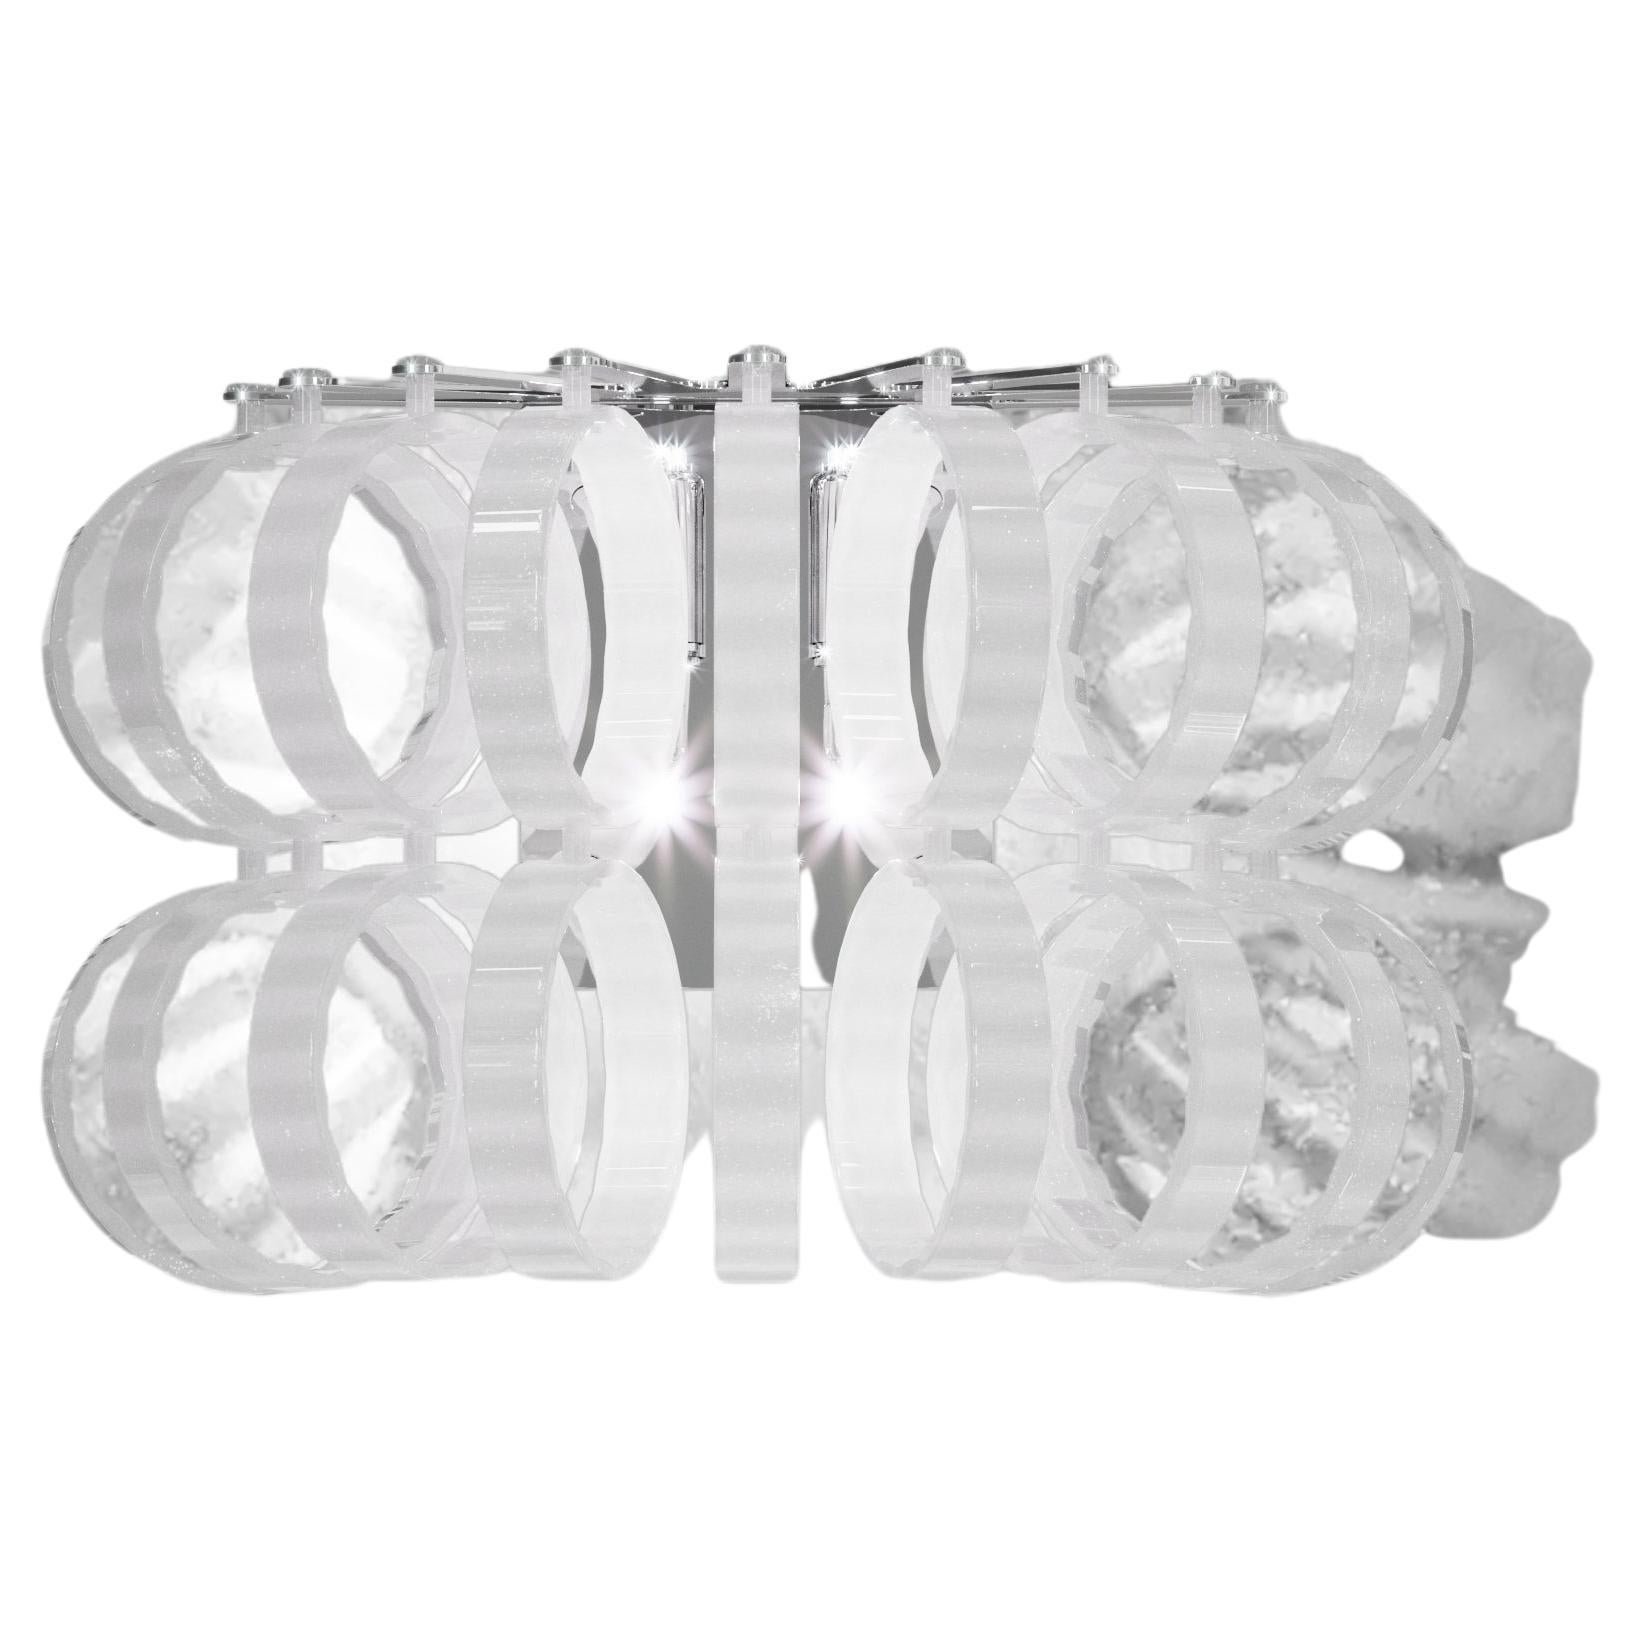 Vistosi Ecos Wall Sconce in White Striped Glass with Glossy Chrome Frame For Sale